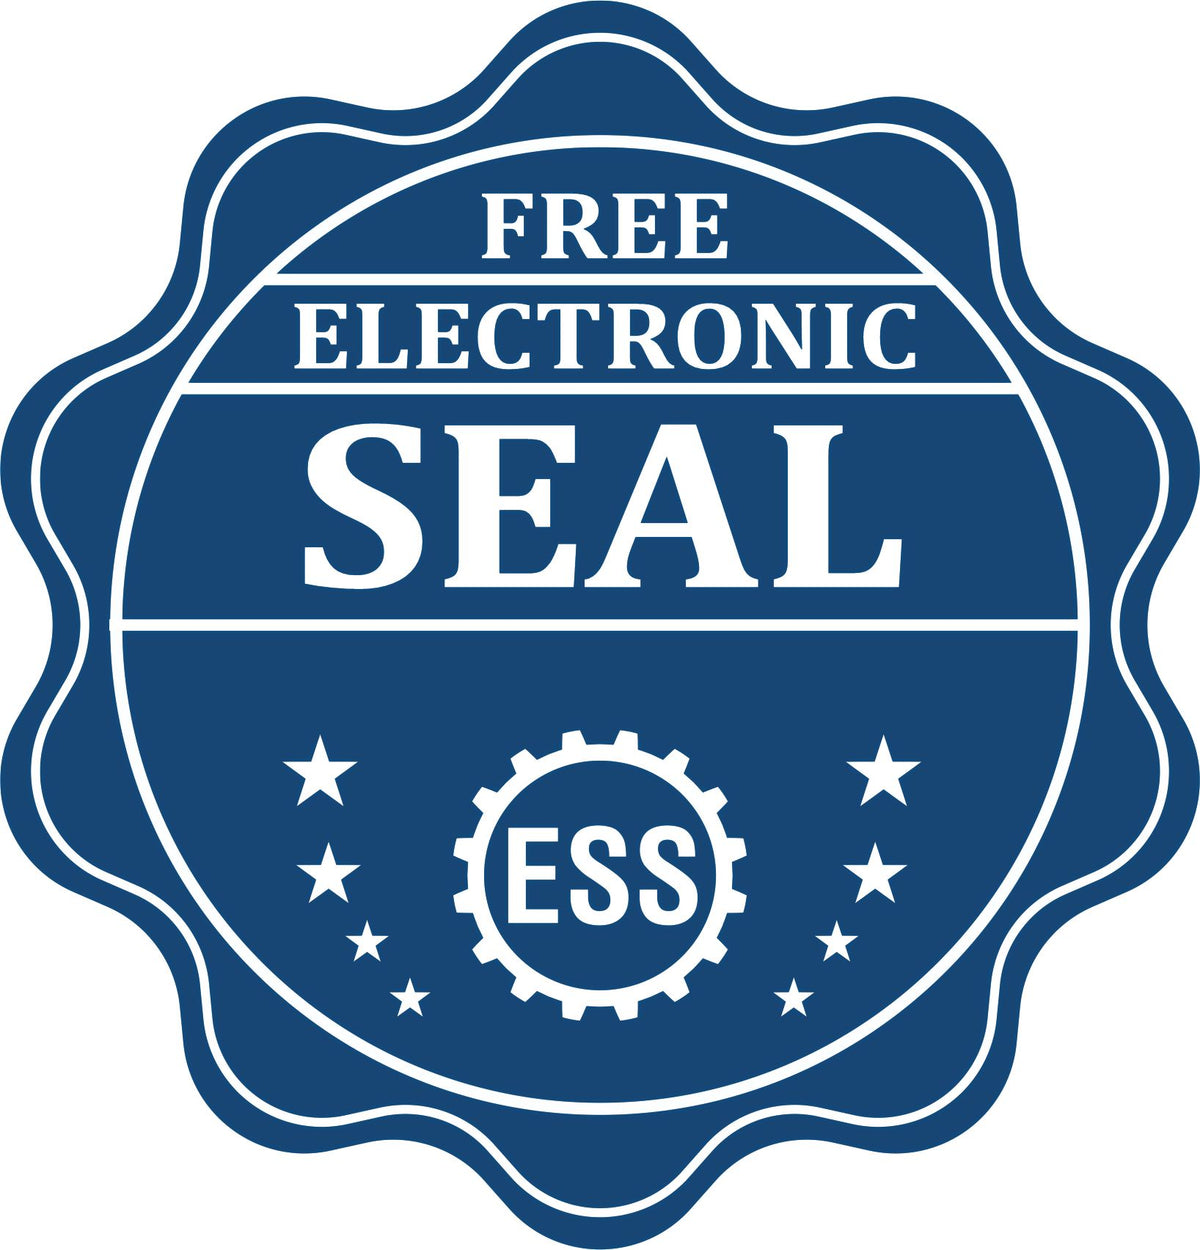 A badge showing a free electronic seal for the Long Reach New Jersey Geology Seal with stars and the ESS gear on the emblem.